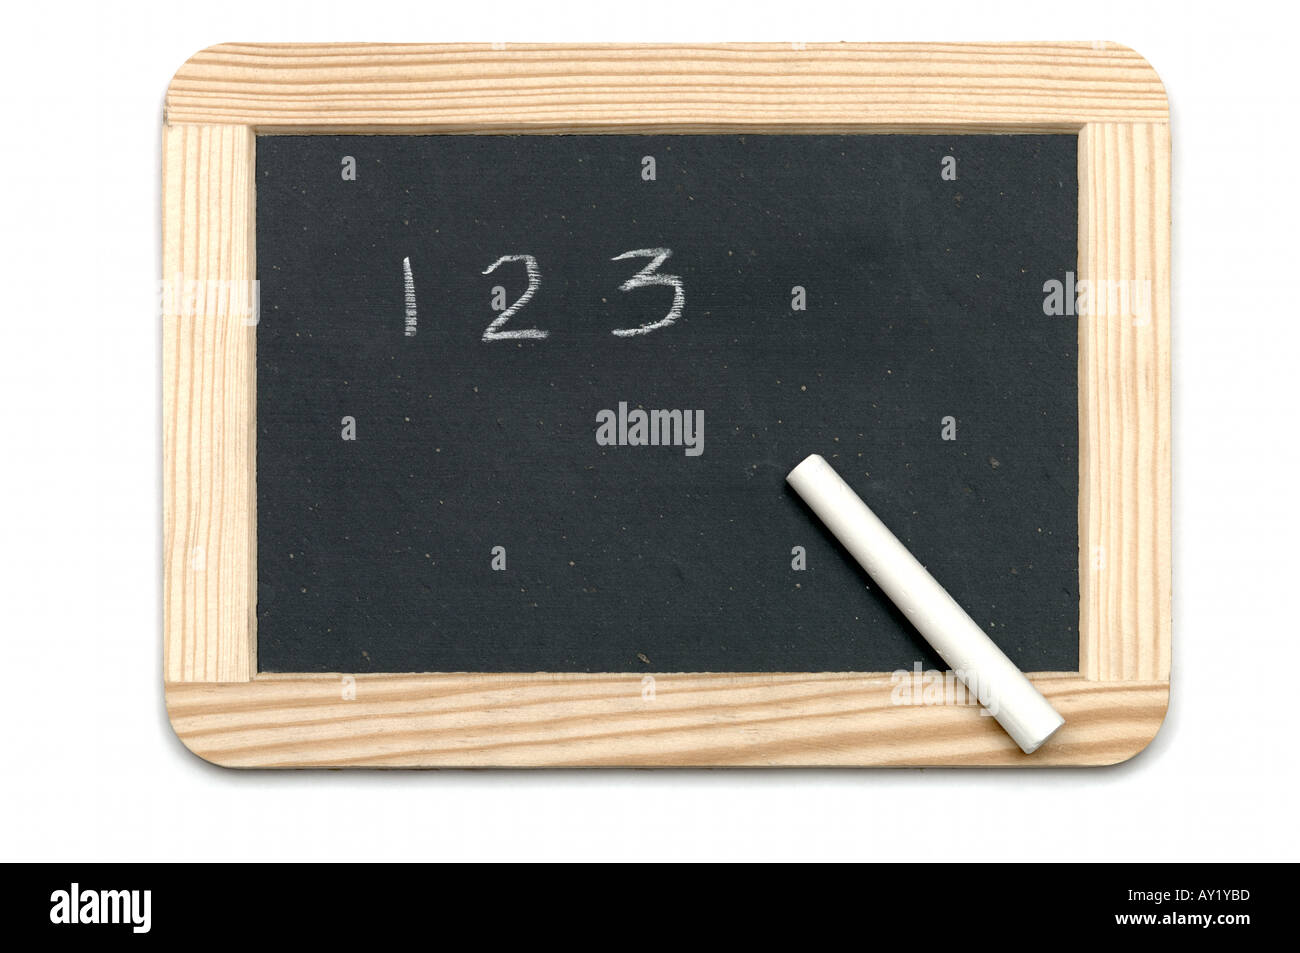 Victorian style black writing slate with wooden frame 123 1 2 3 written with chalk on white background Stock Photo